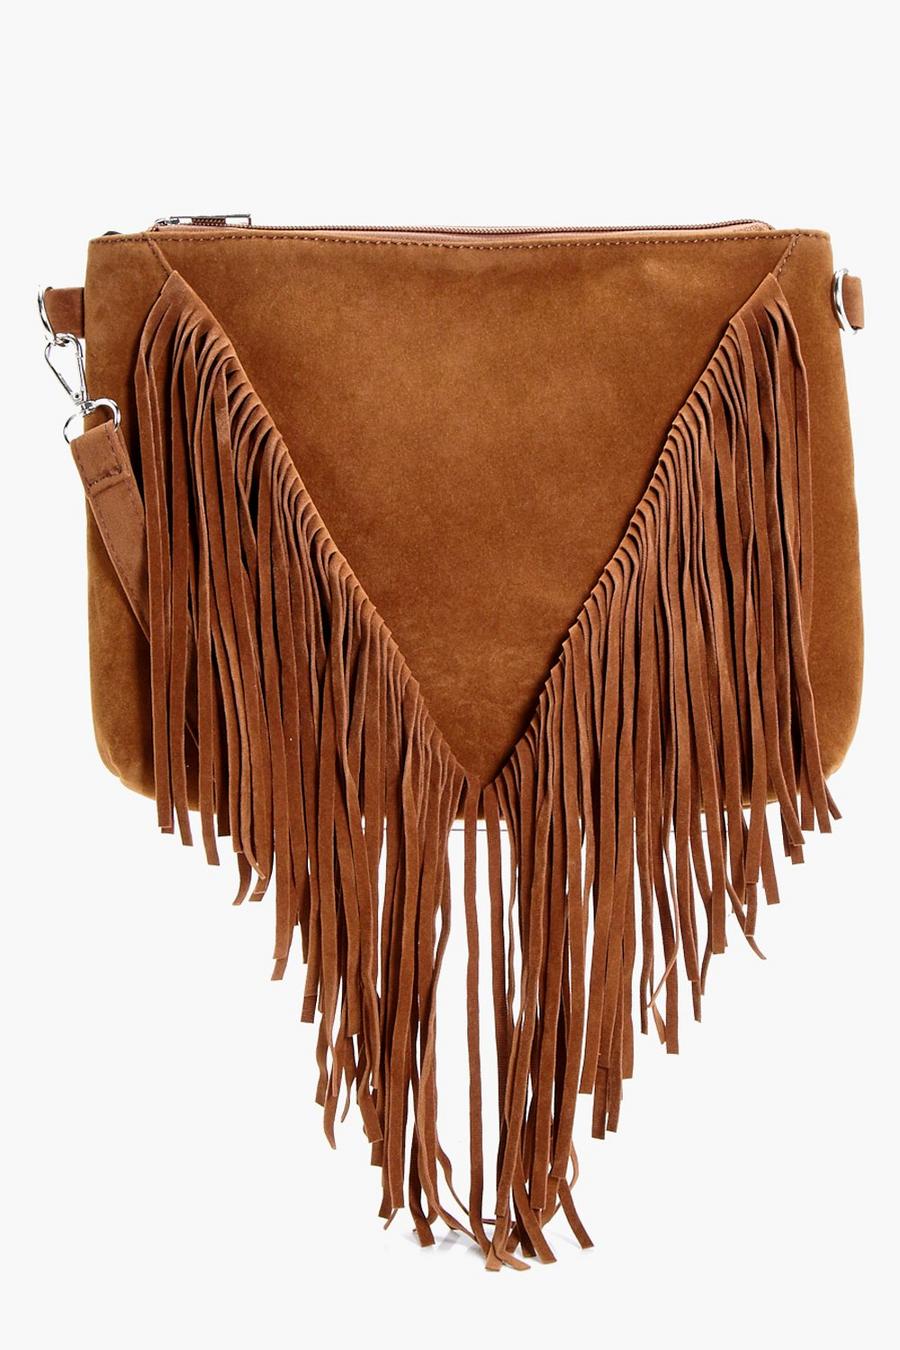 Tan brown Suedette Fringed Cross Body Bag